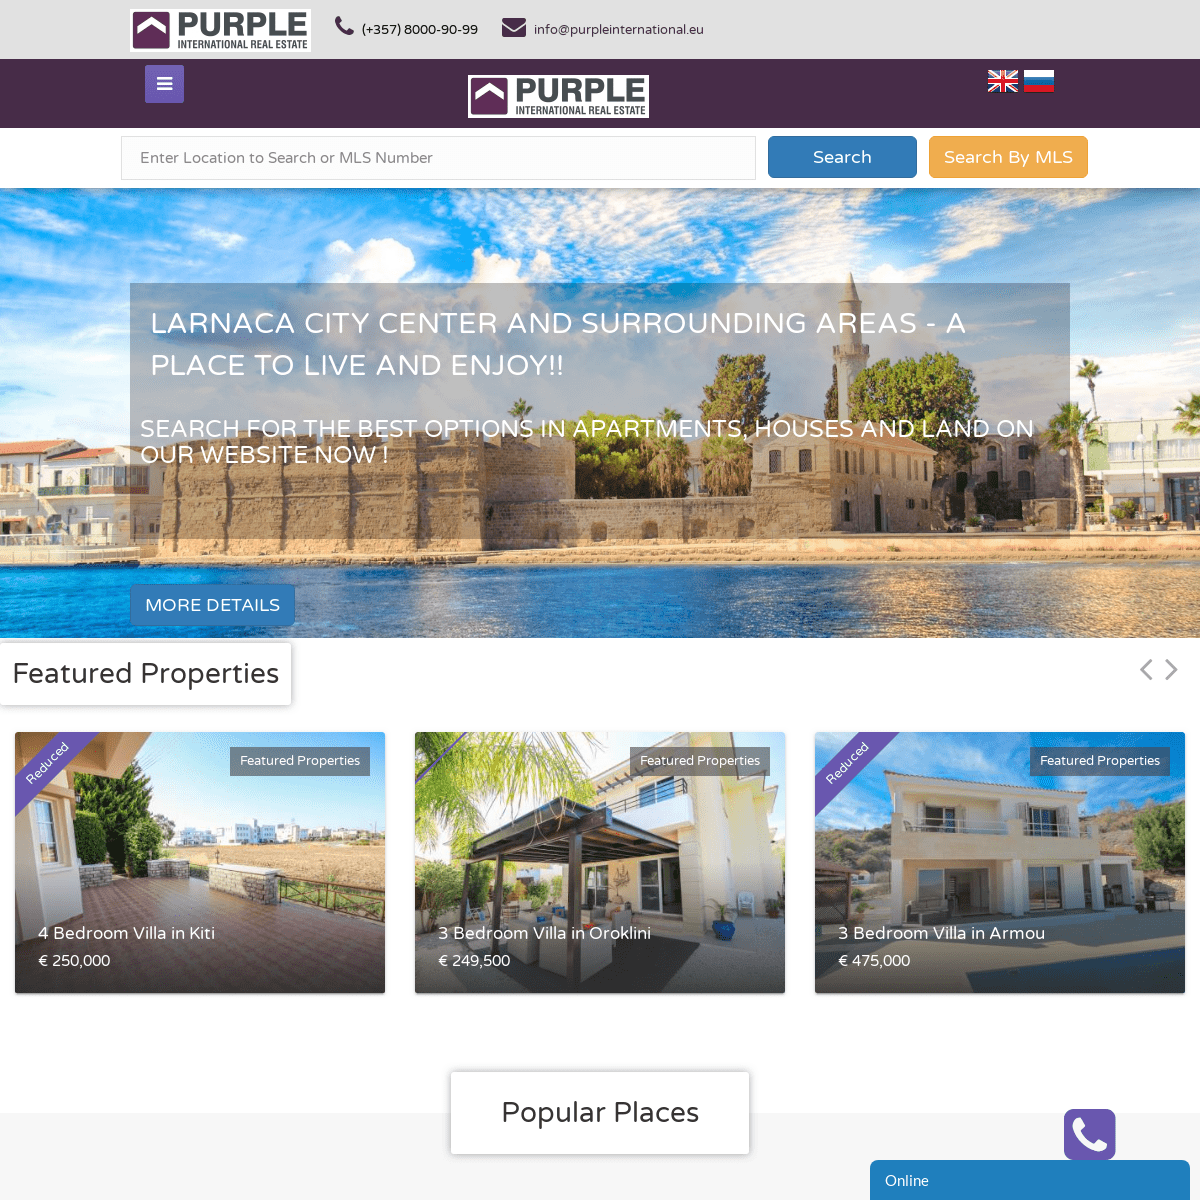 Properties for Sale or Rent all over Cyprus - Purple Real Estate LTD - Purple